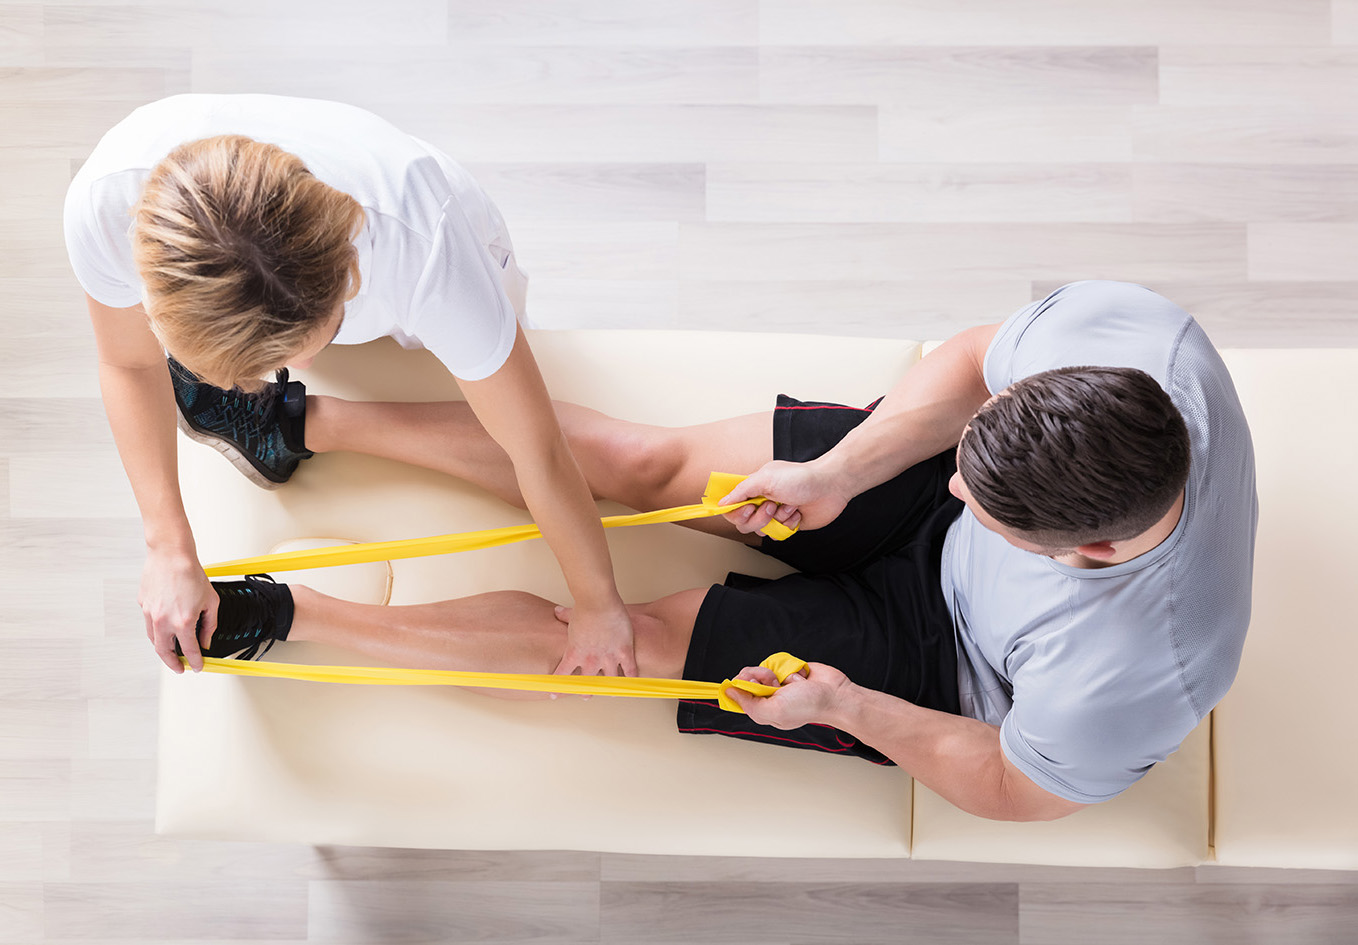 Bodies in Motion Physical Therapy – Physical Therapy & Fitness